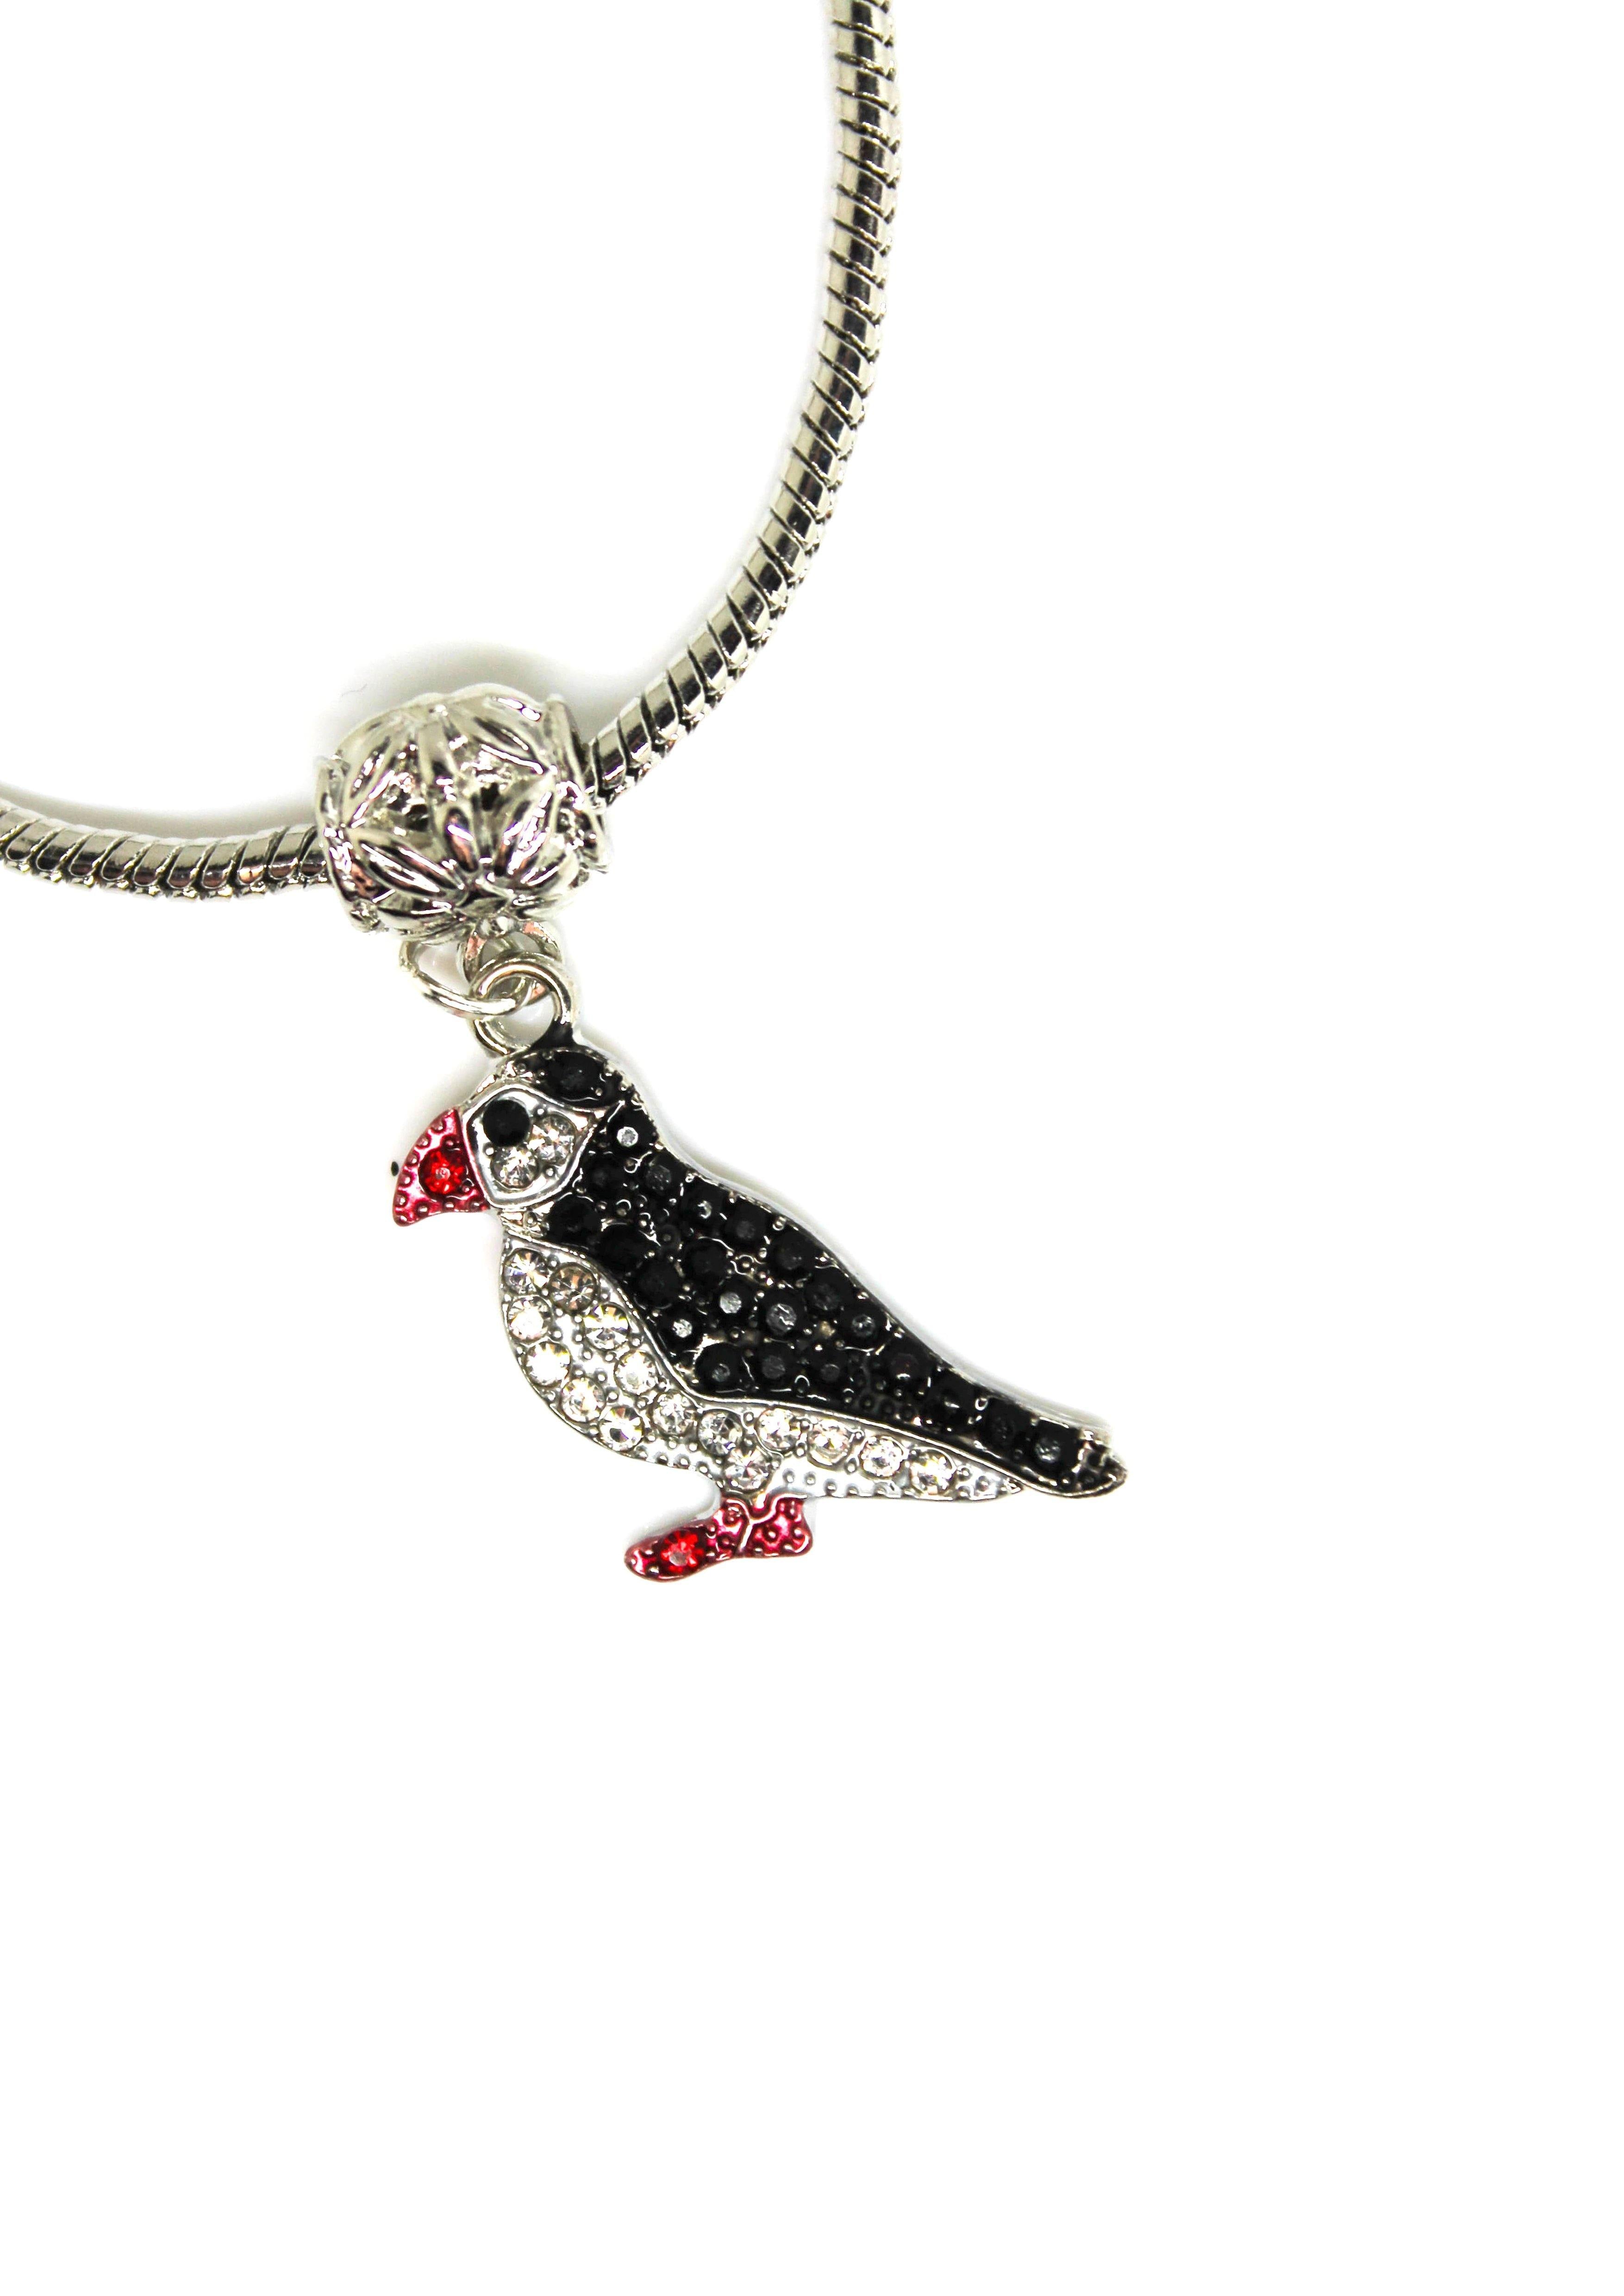 Puffin Charm Bracelet - Wildtouch - Wildtouch